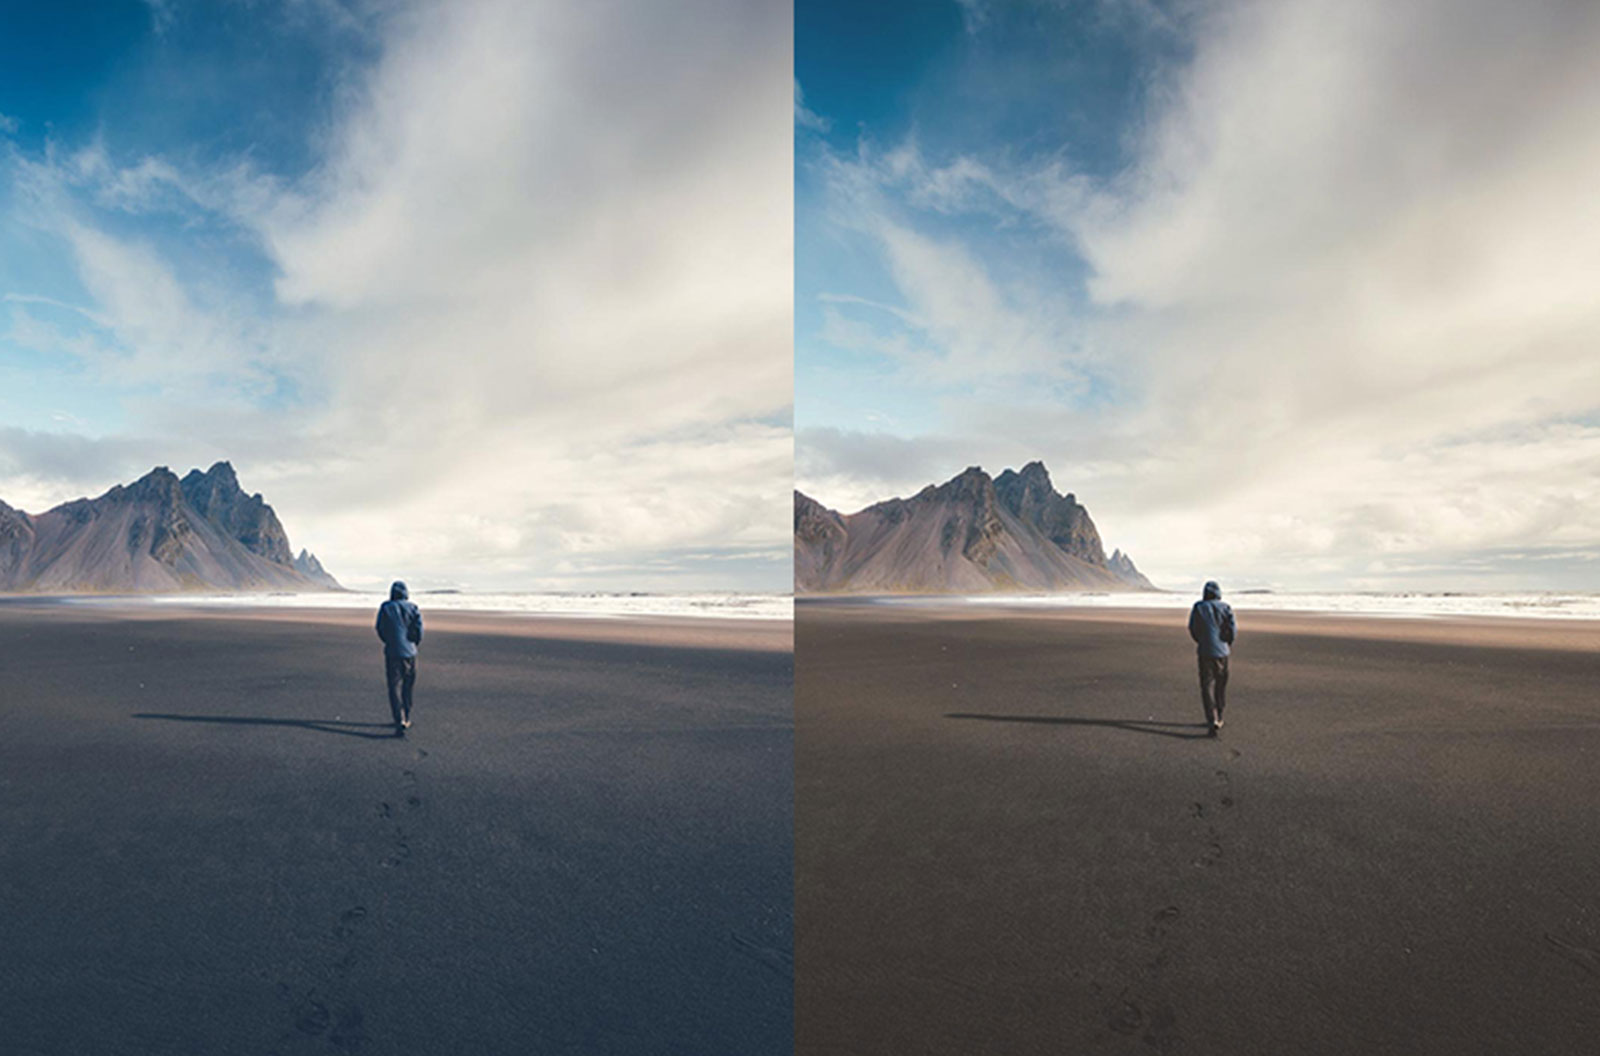 Side by side image comparisons of a man walking on a beach to illustrate different white balance settings